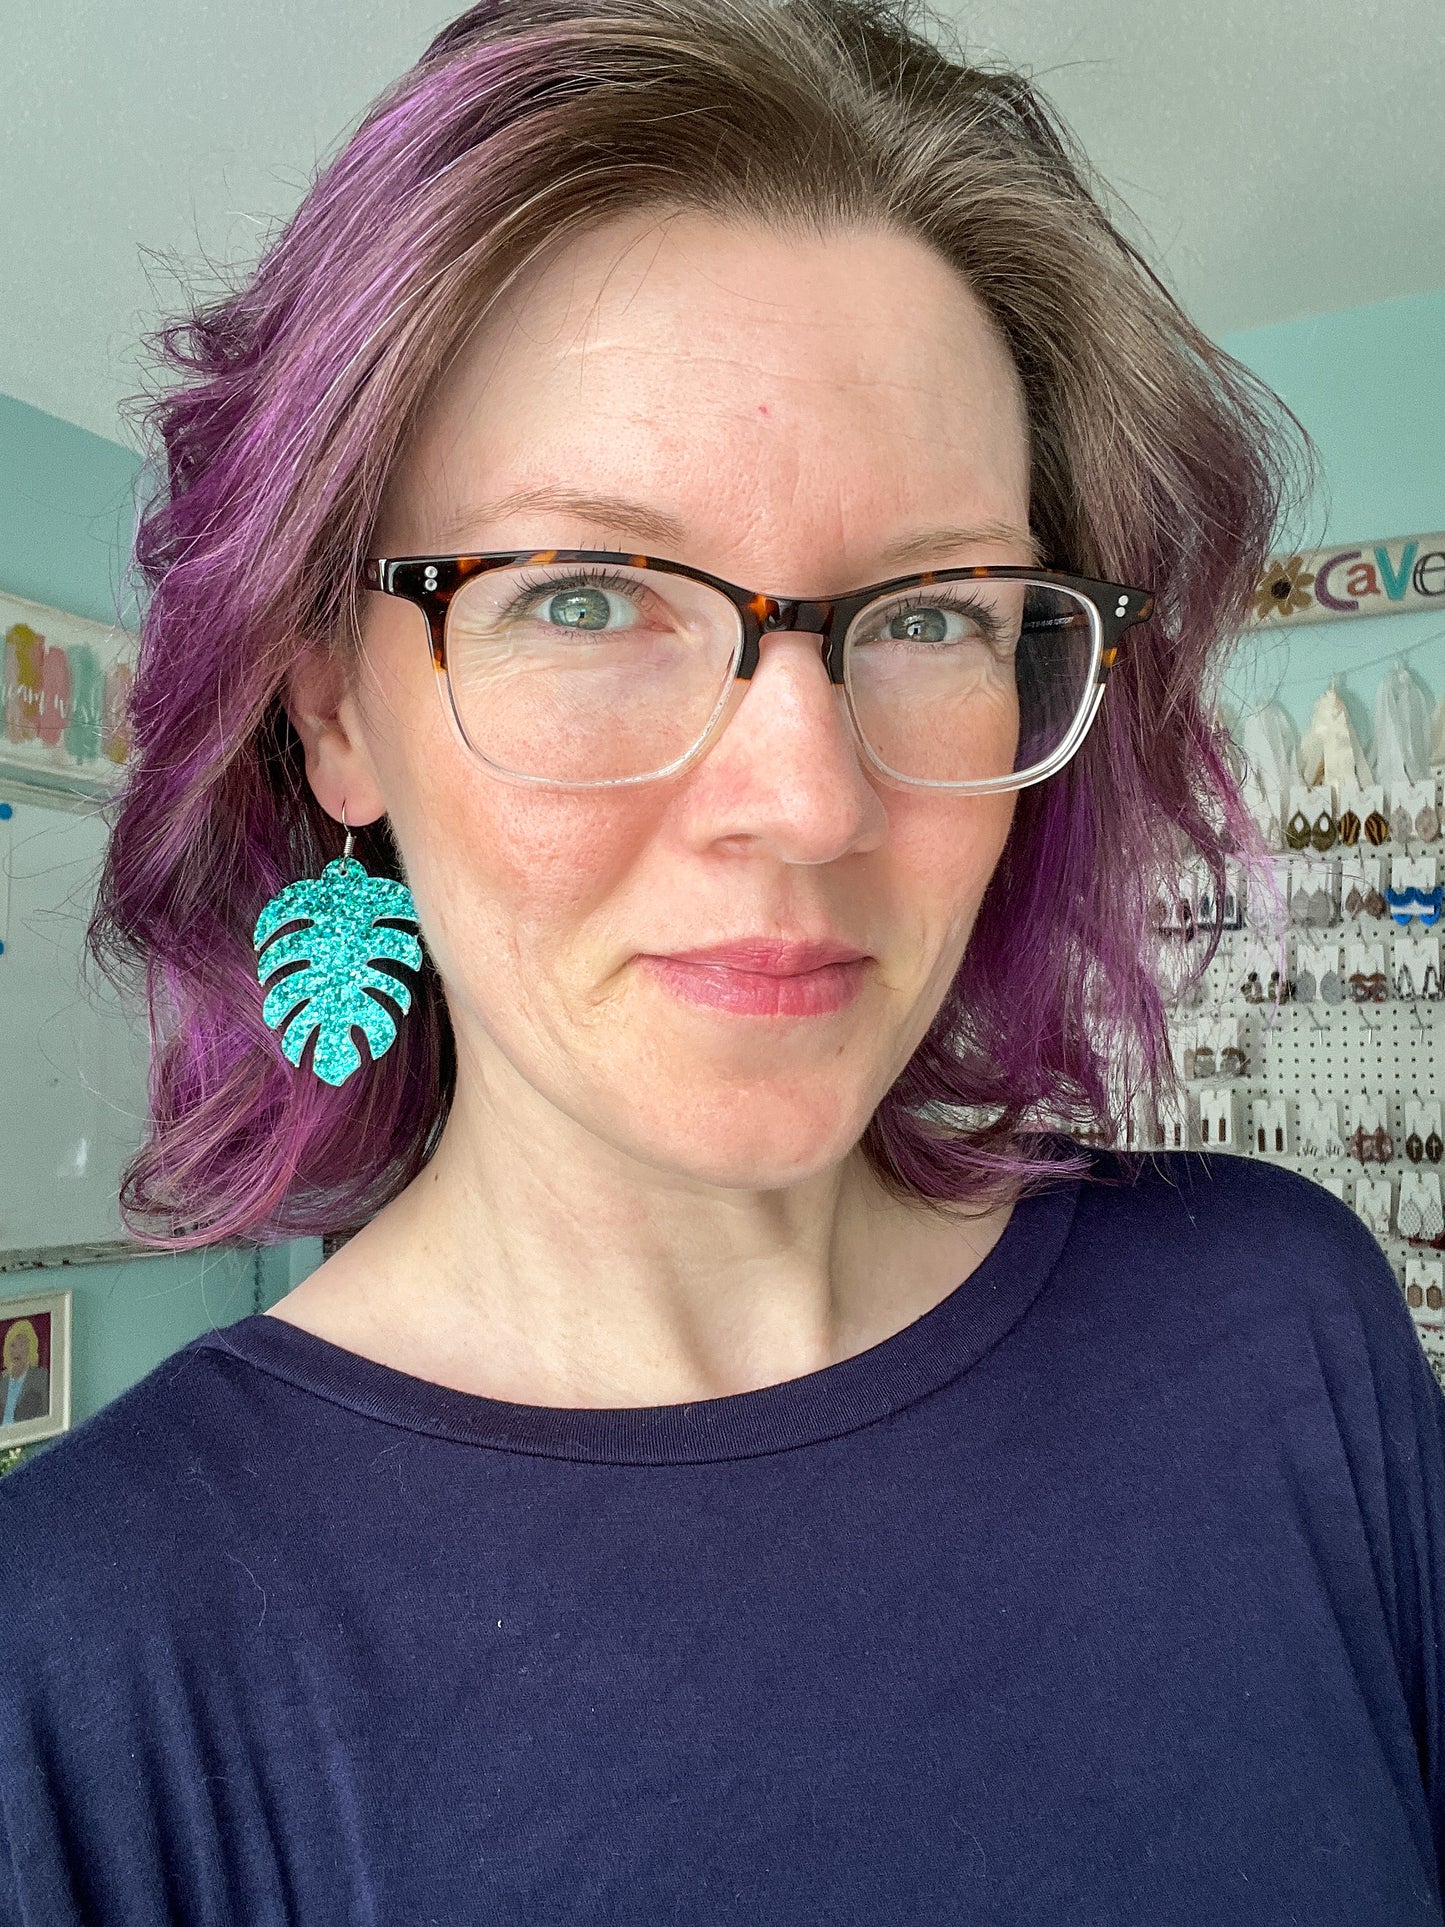 Blue-Green "Chunky" Glitter Leather Earrings: Choose From 2 Styles